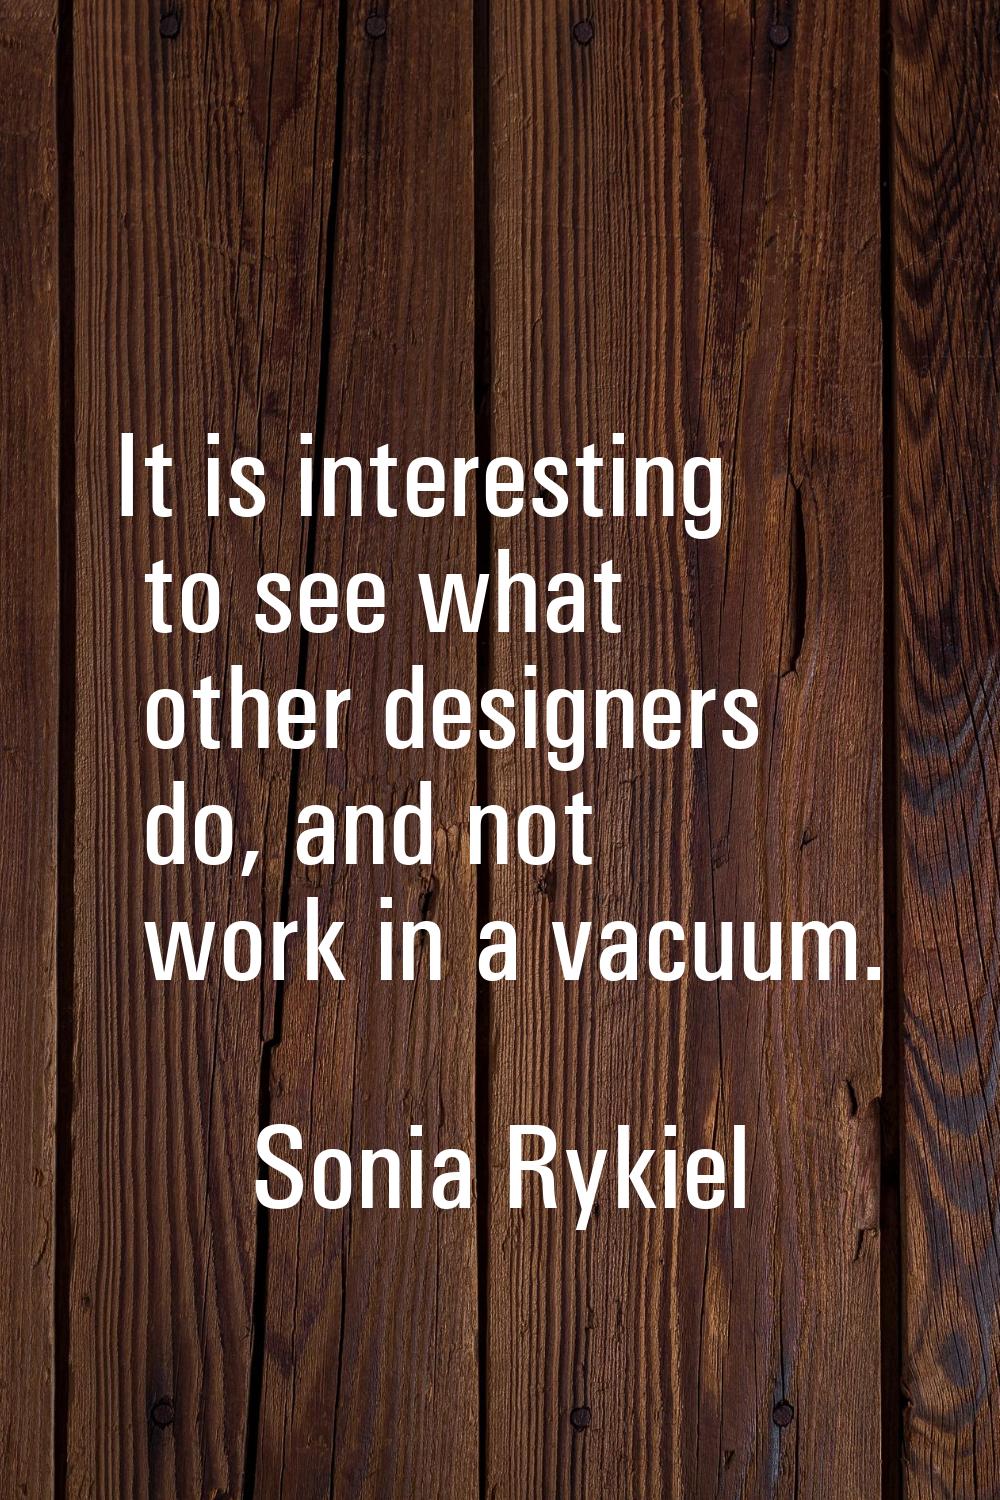 It is interesting to see what other designers do, and not work in a vacuum.